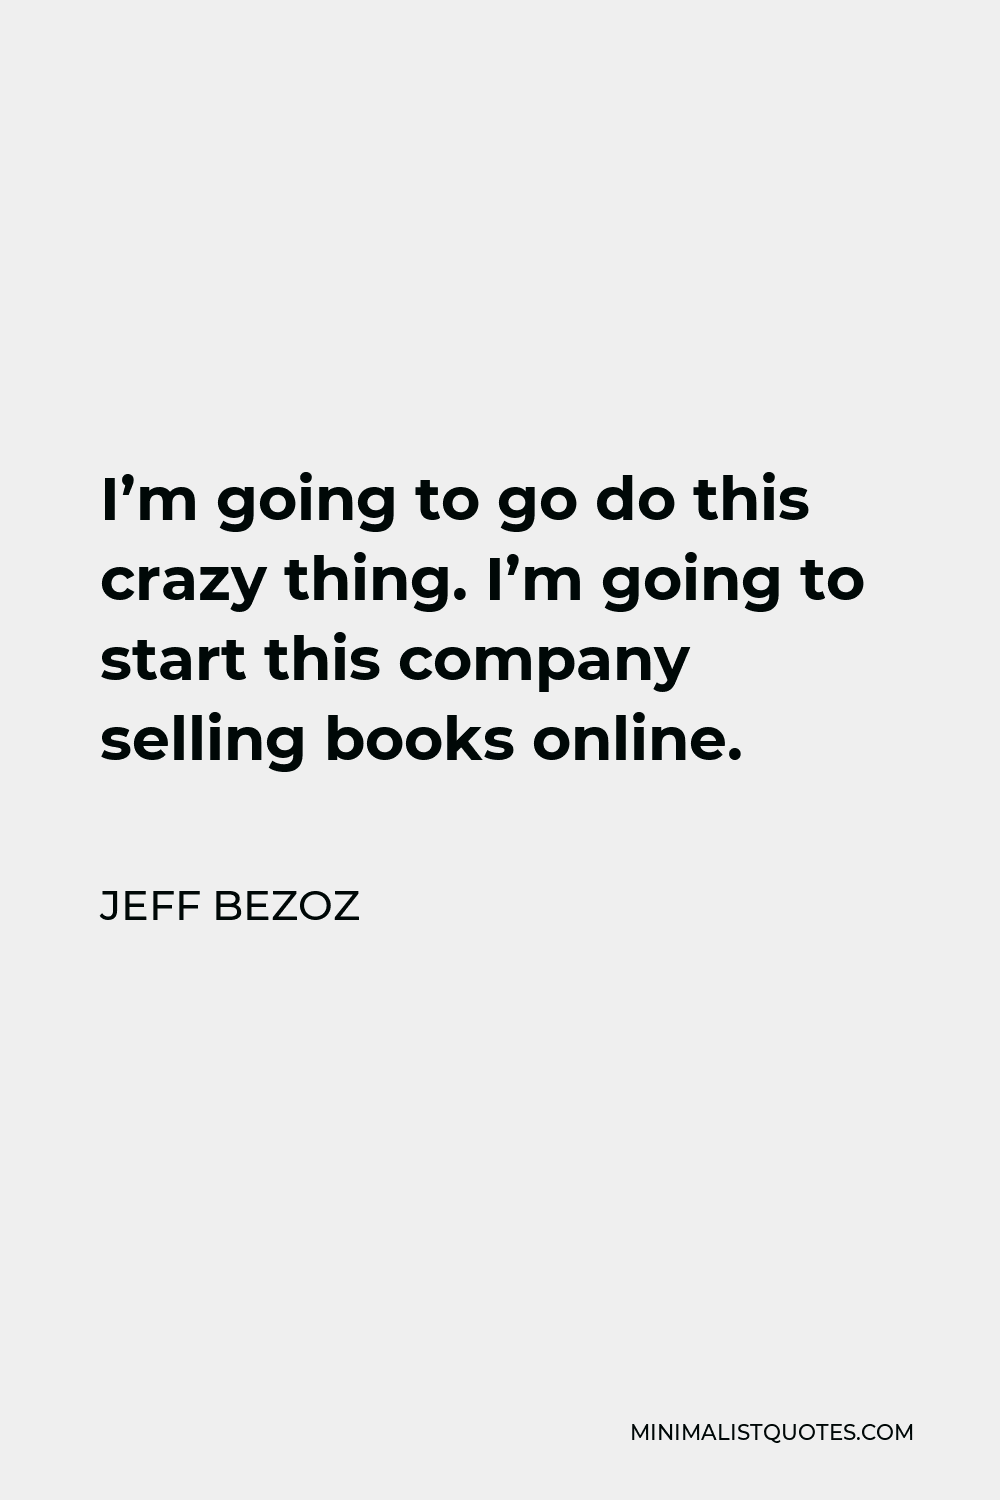 Jeff Bezoz Quote - I’m going to go do this crazy thing. I’m going to start this company selling books online.